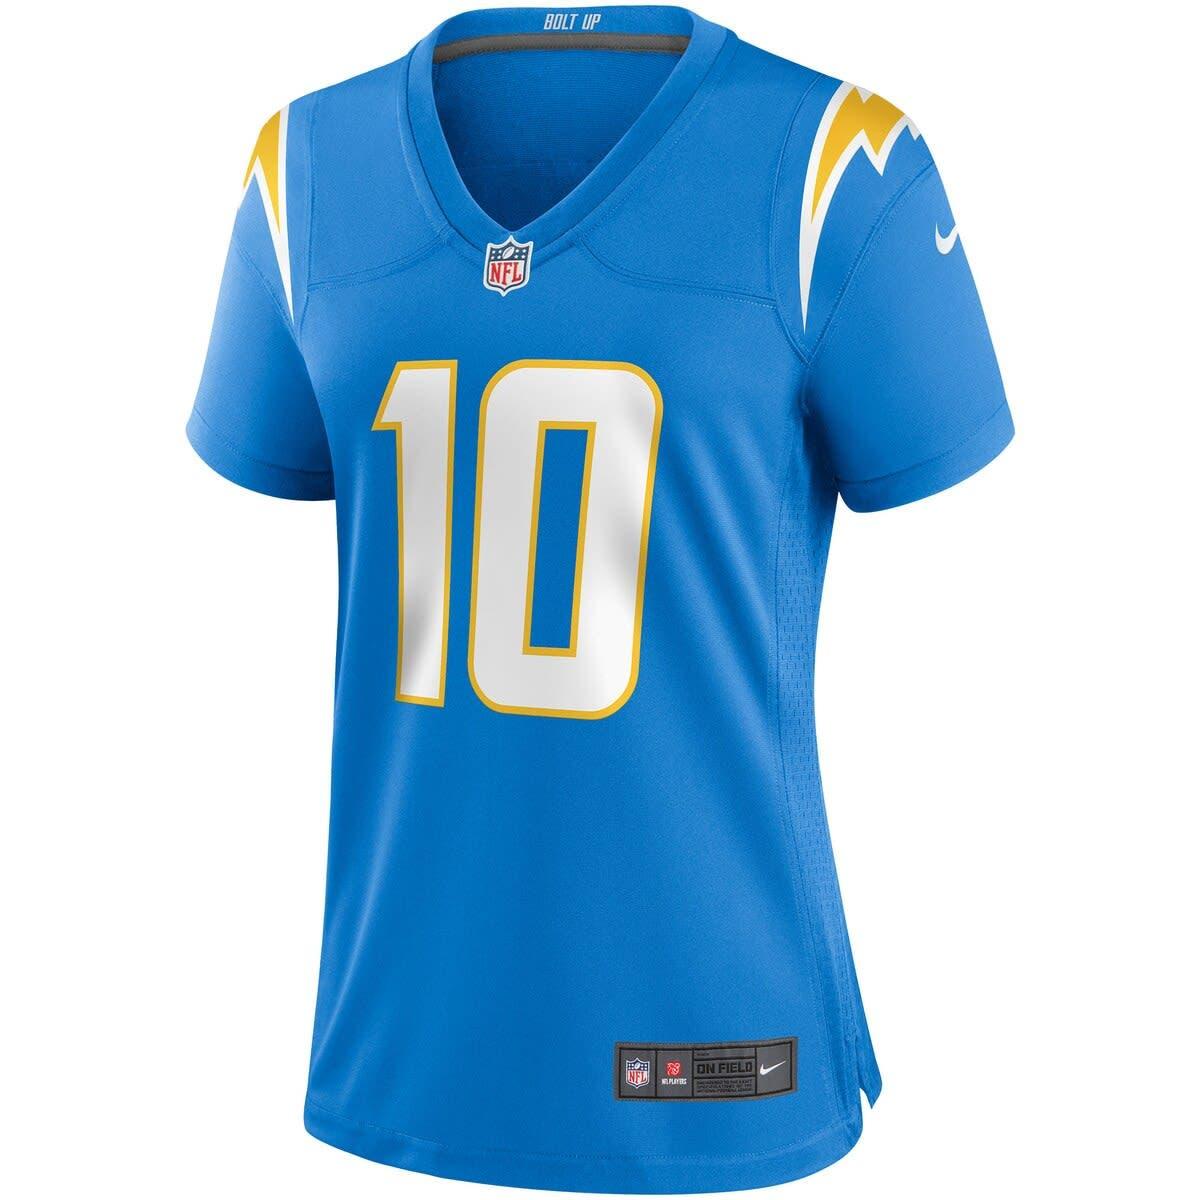 Los Angeles Chargers Derwin James Nike Jersey - Powder Blue